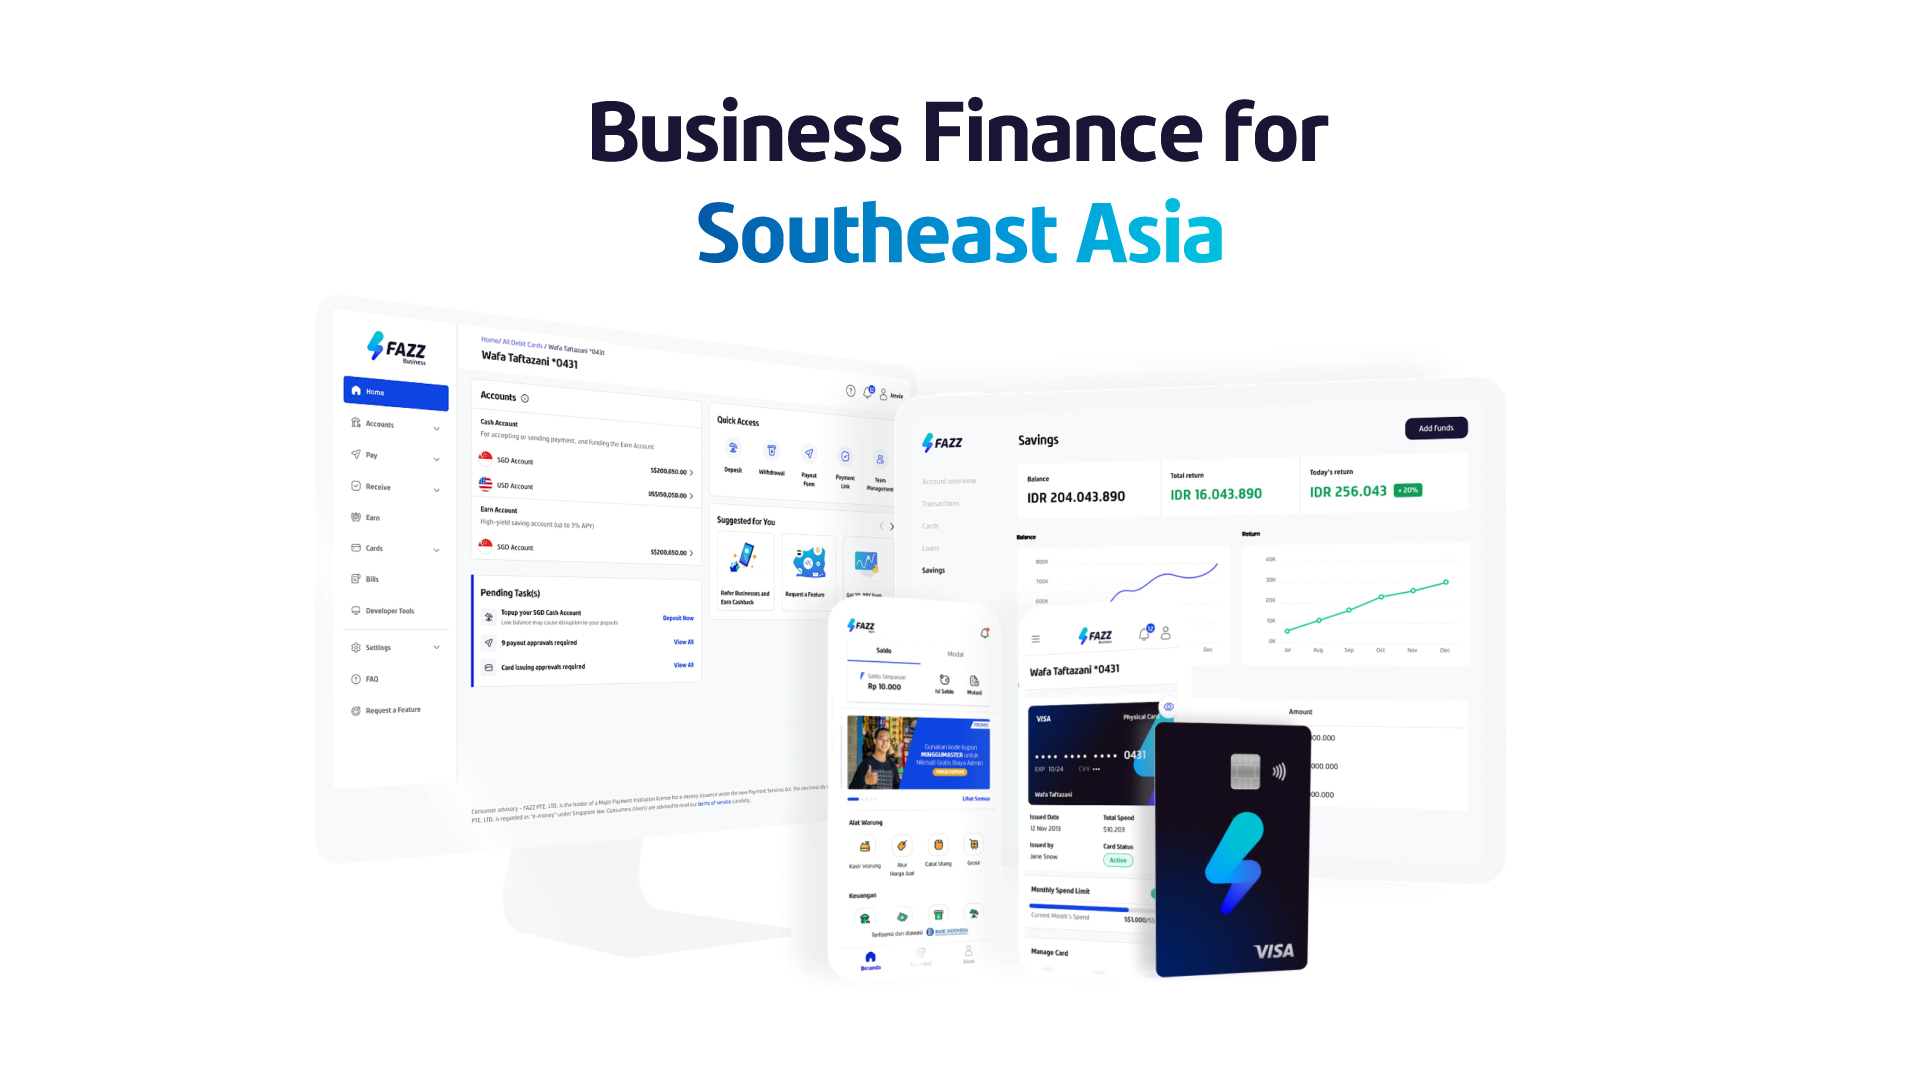 Business Finance for Southeast Asia